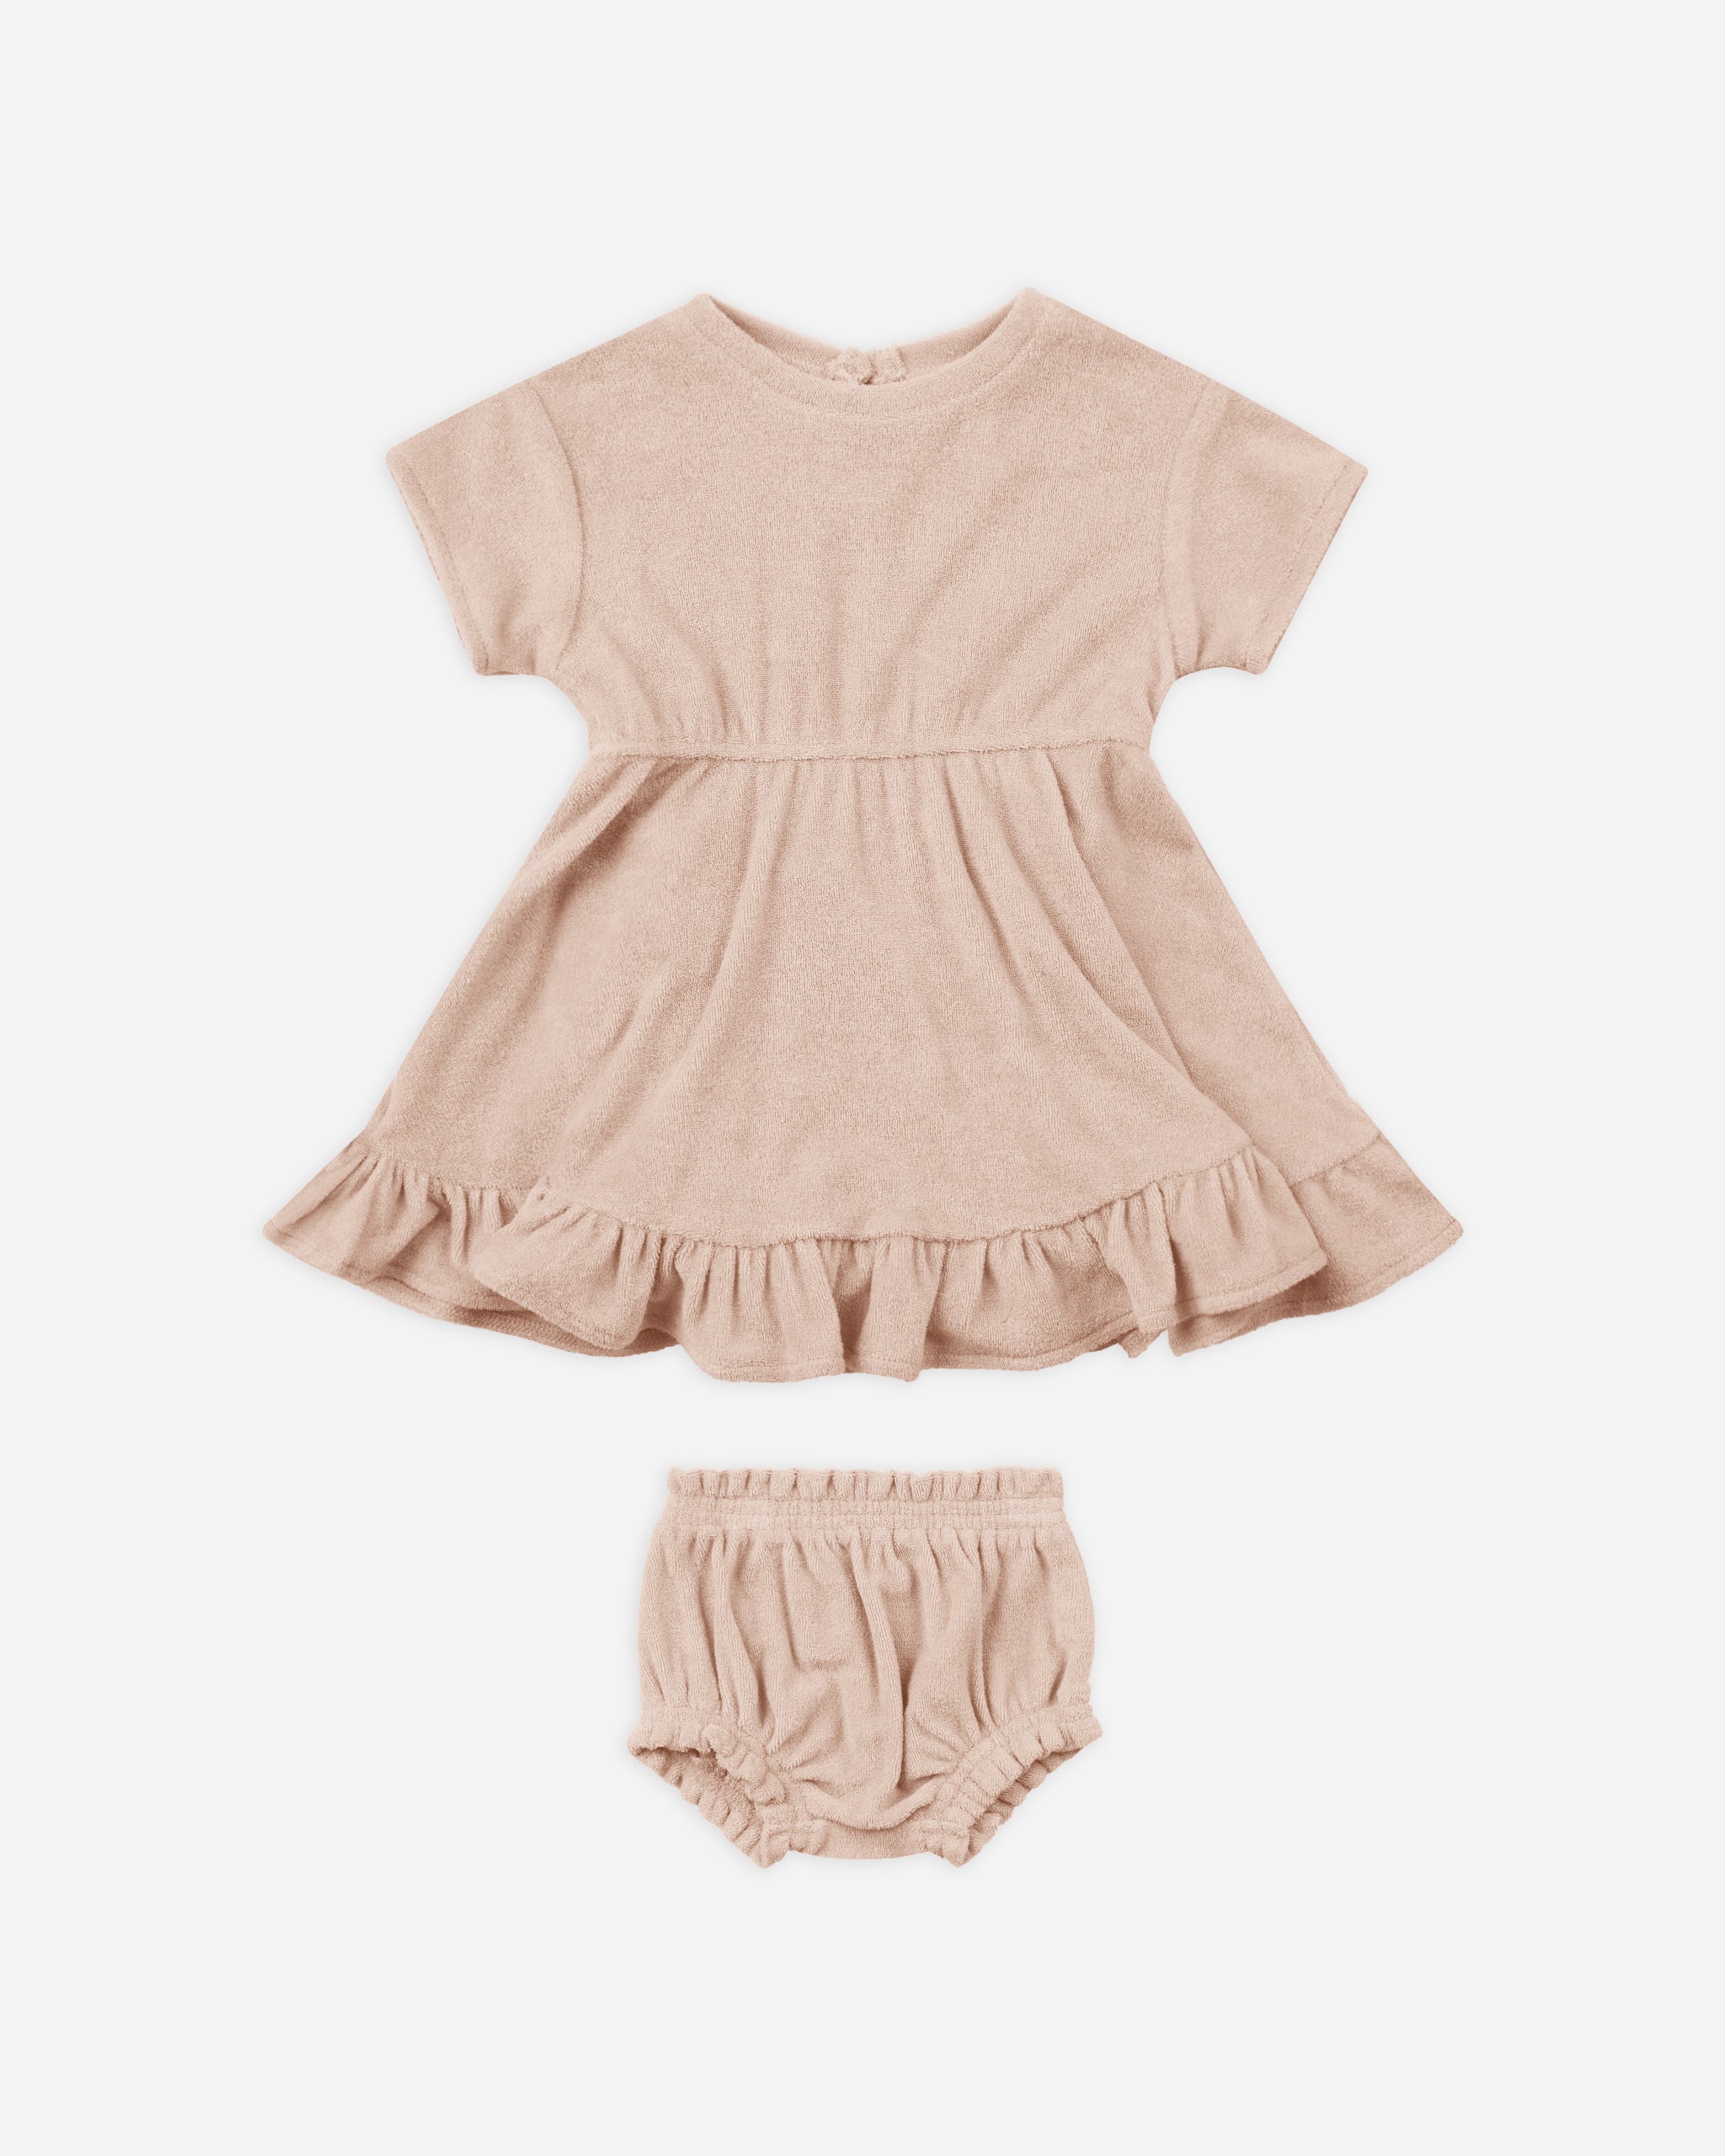 Terry Dress || Blush - Rylee + Cru | Kids Clothes | Trendy Baby Clothes | Modern Infant Outfits |